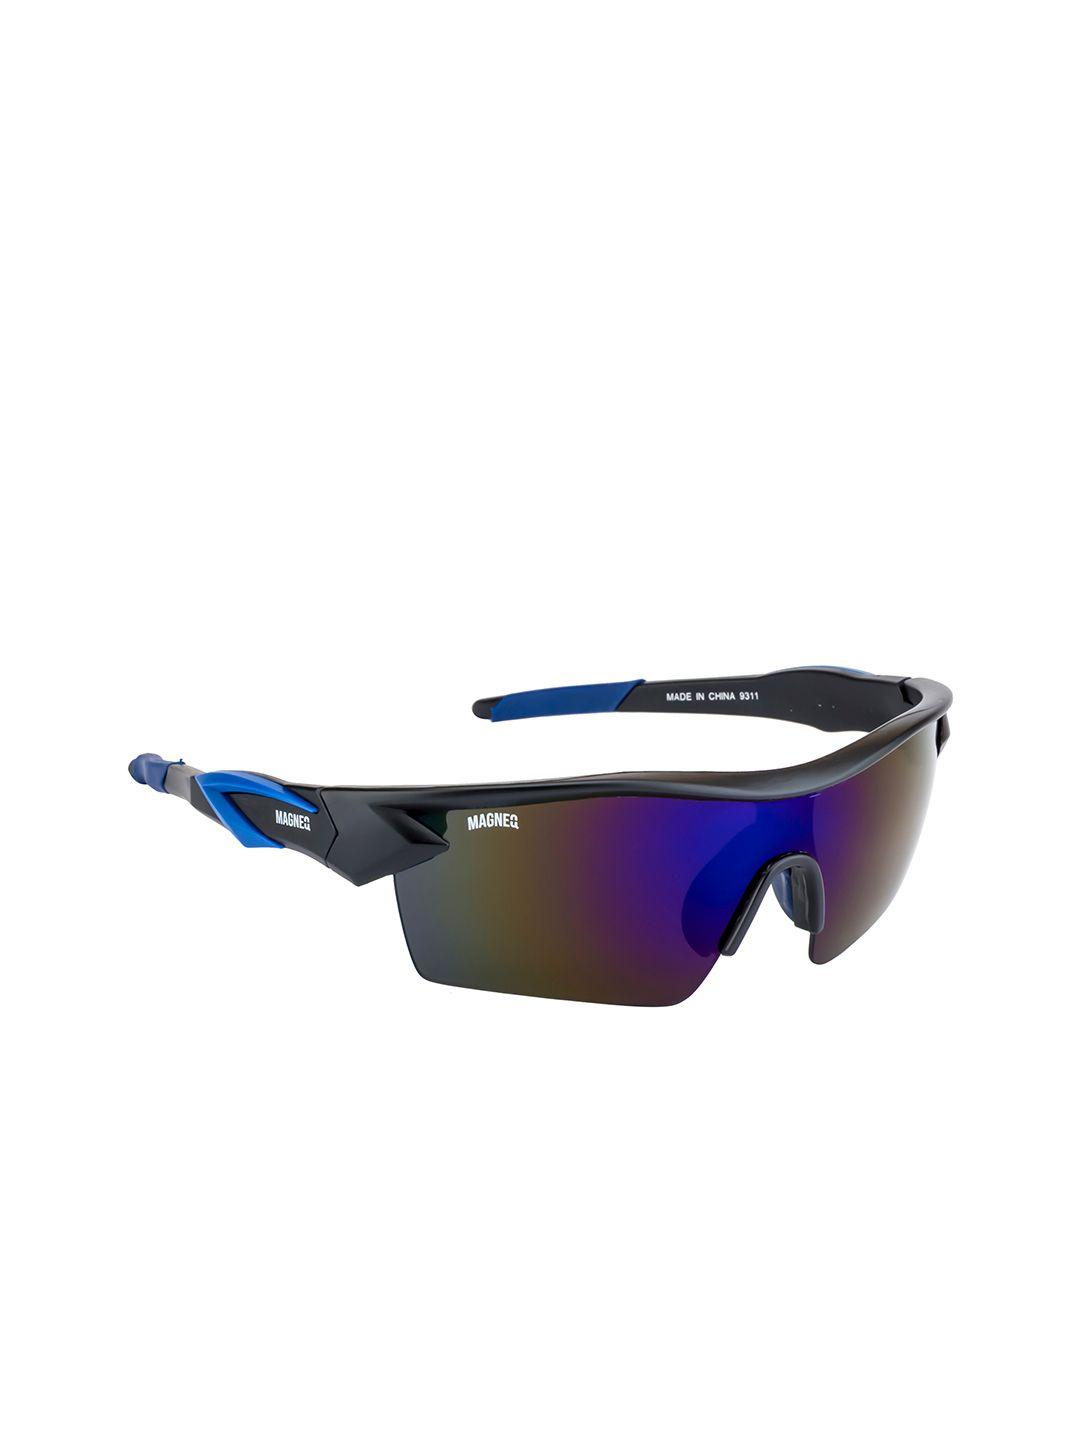 magneq unisex blue lens & blue sports sunglasses with uv protected lens